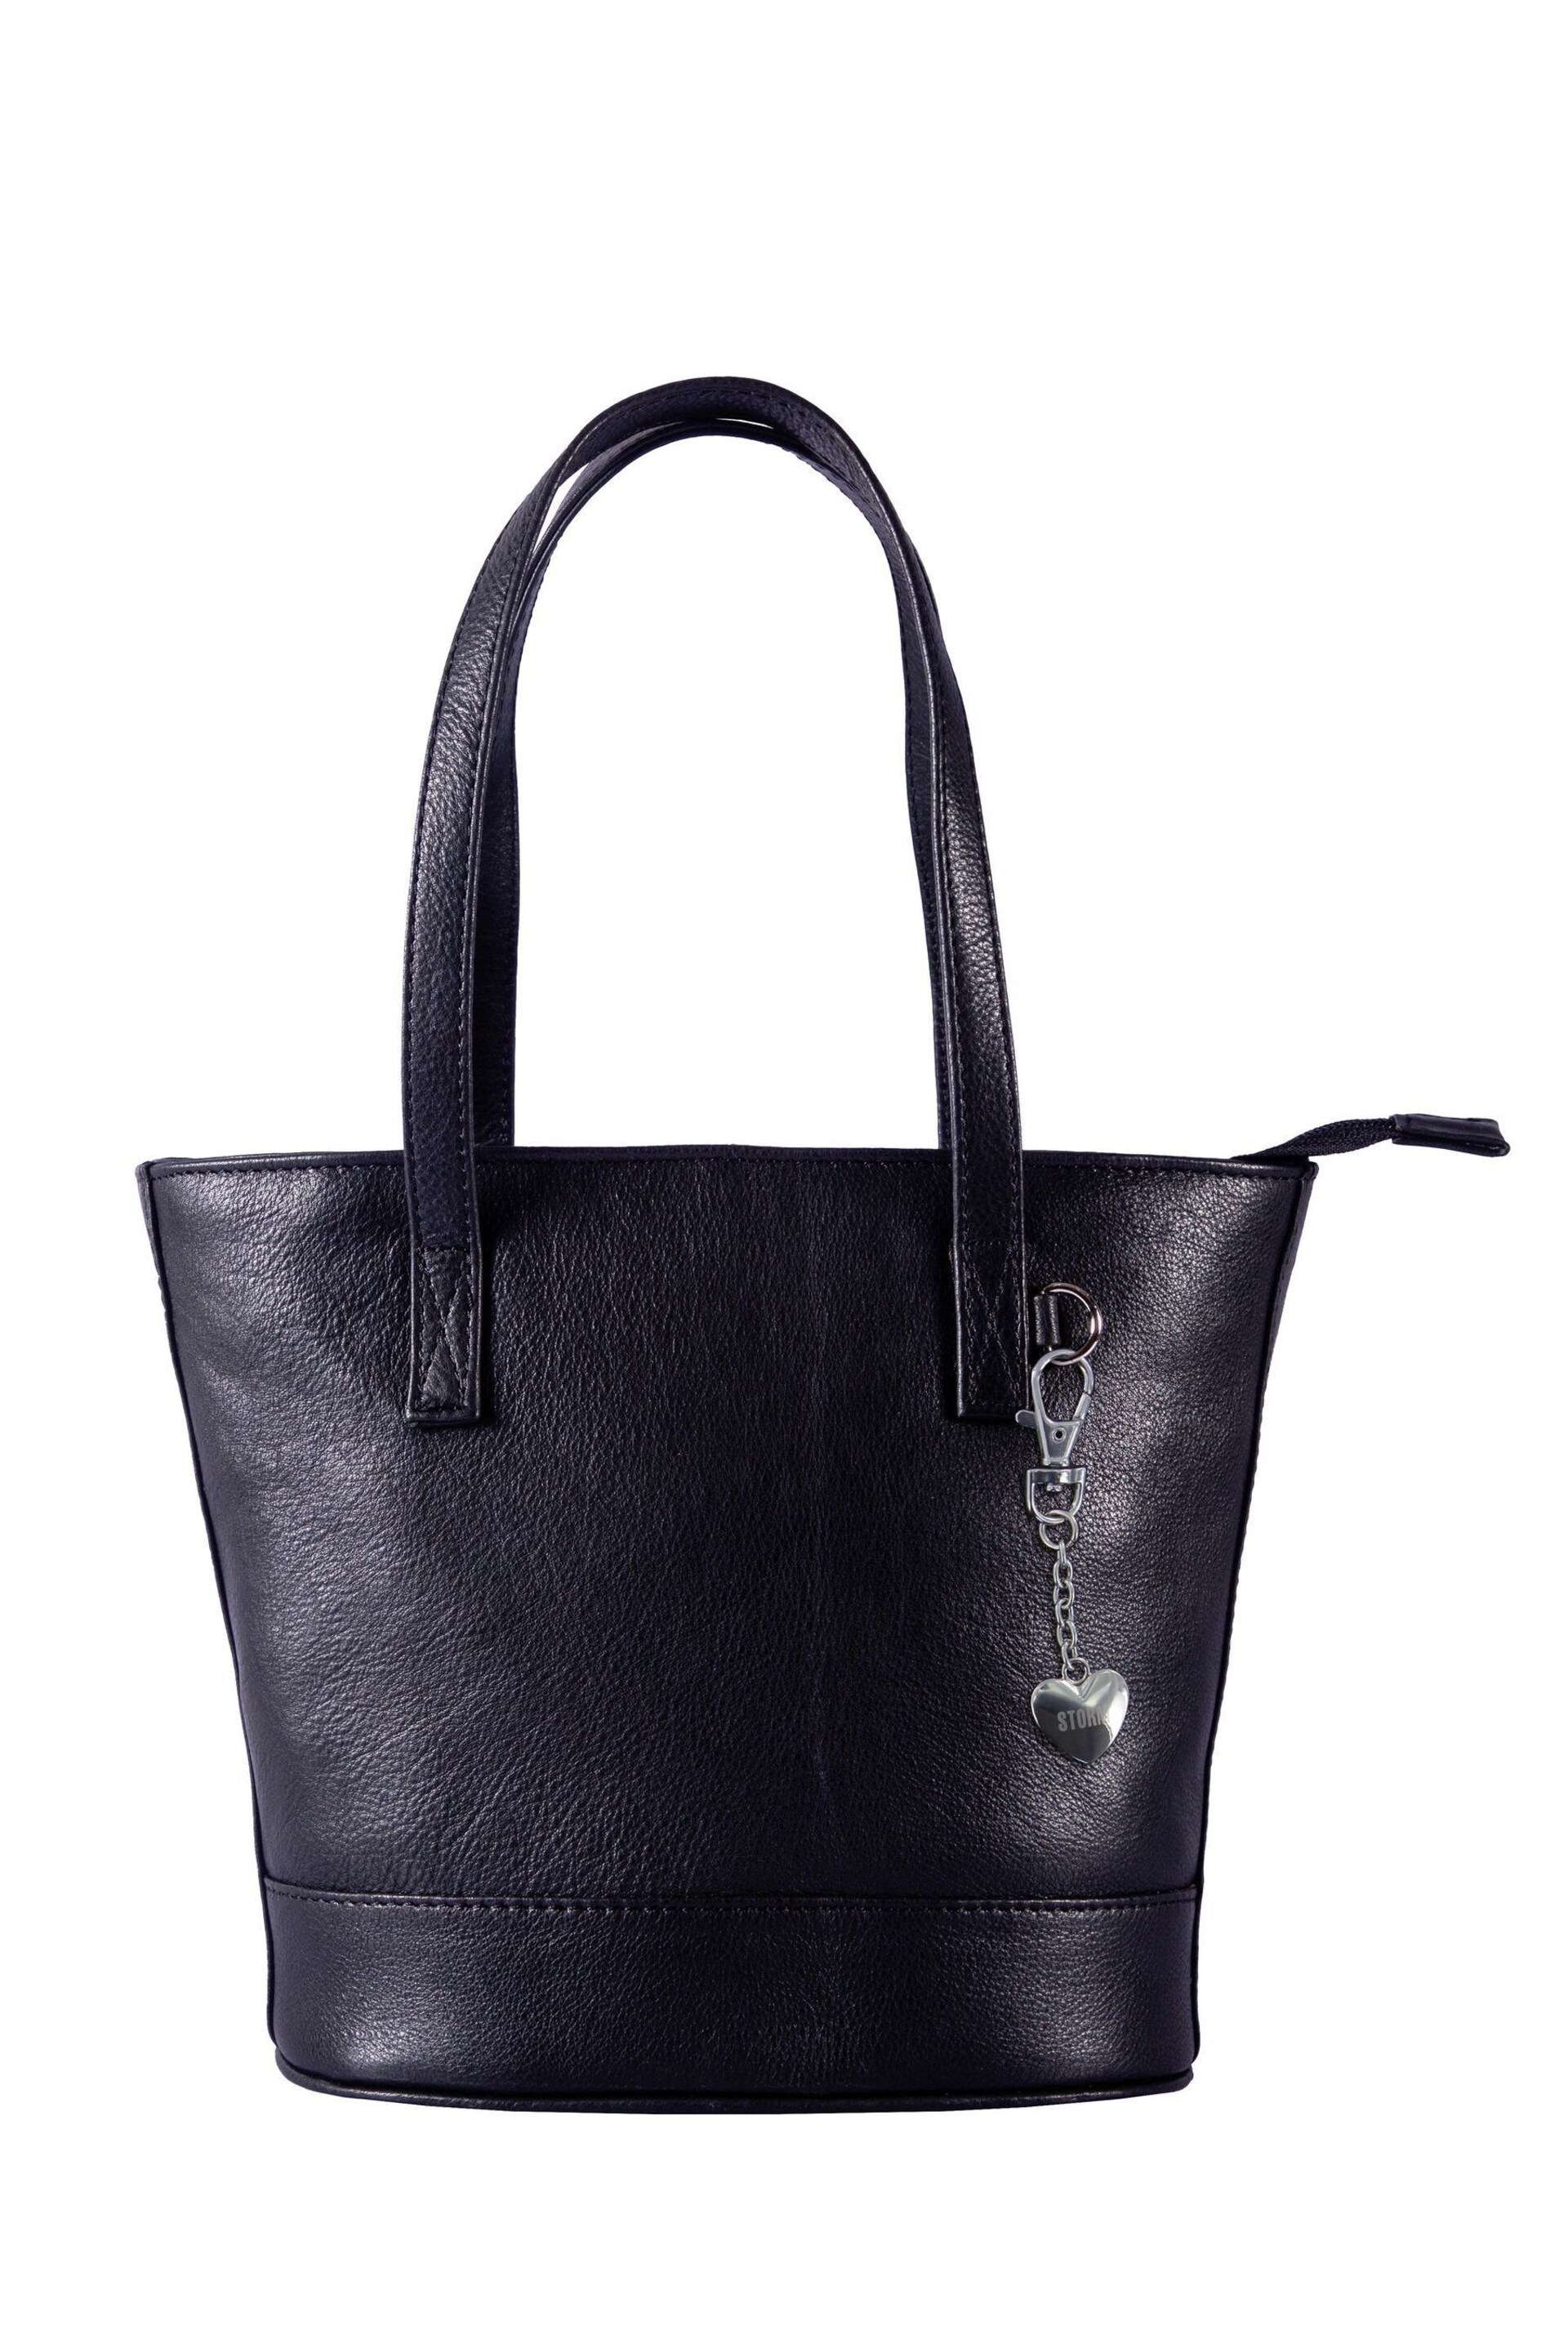 Storm Elettra Leather Bucket Grab Bag - Image 2 of 5